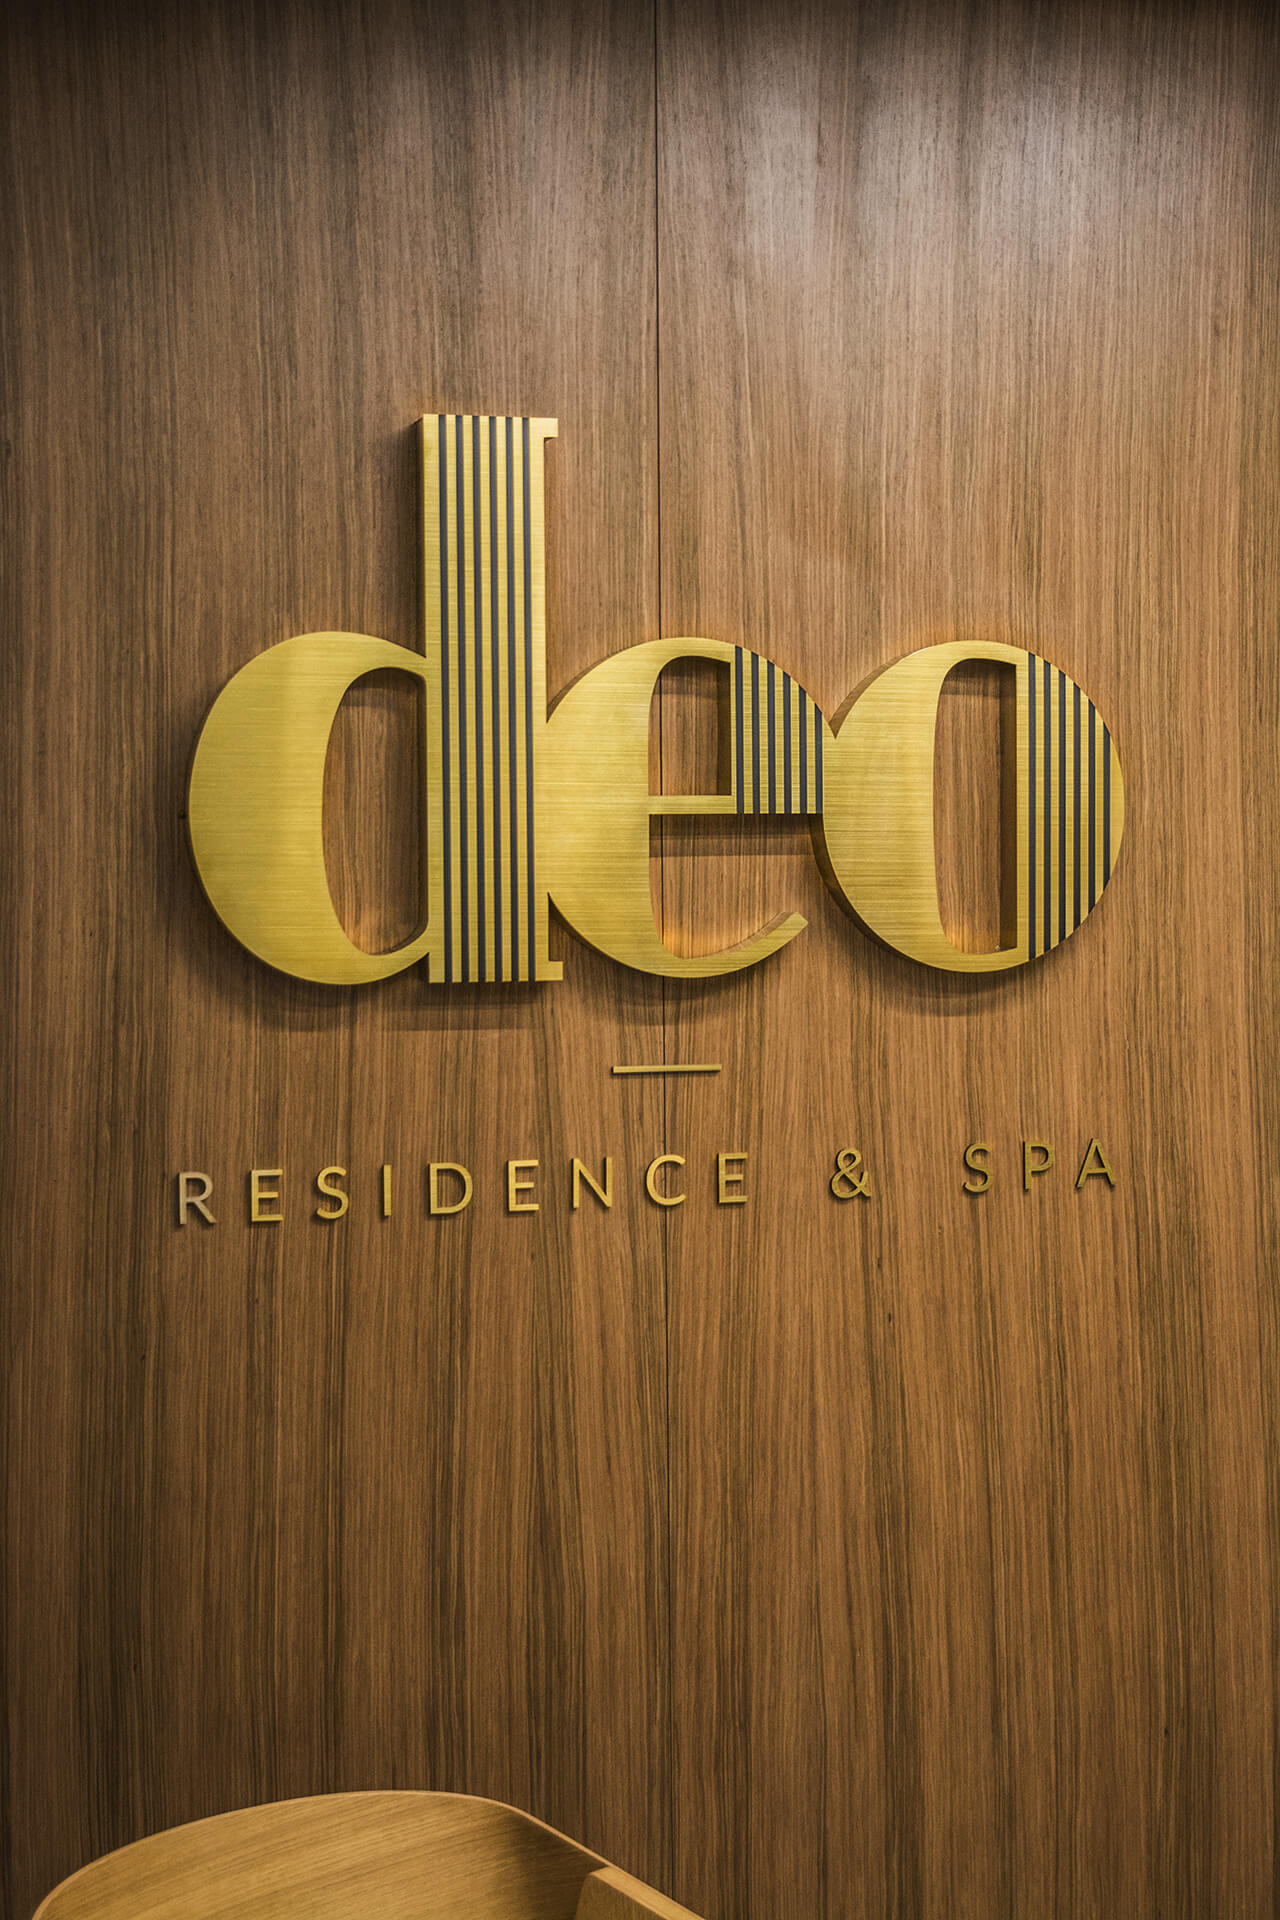 deo residence deo hotel spa - deo-residence-lettering-from-safe-steel-brushed-lettering-above-entry-to-office-building-height-lettering-mounted-to-the-wall-lettering-on-capitals-lettering-on-desk-logo-firmowe-gdansk